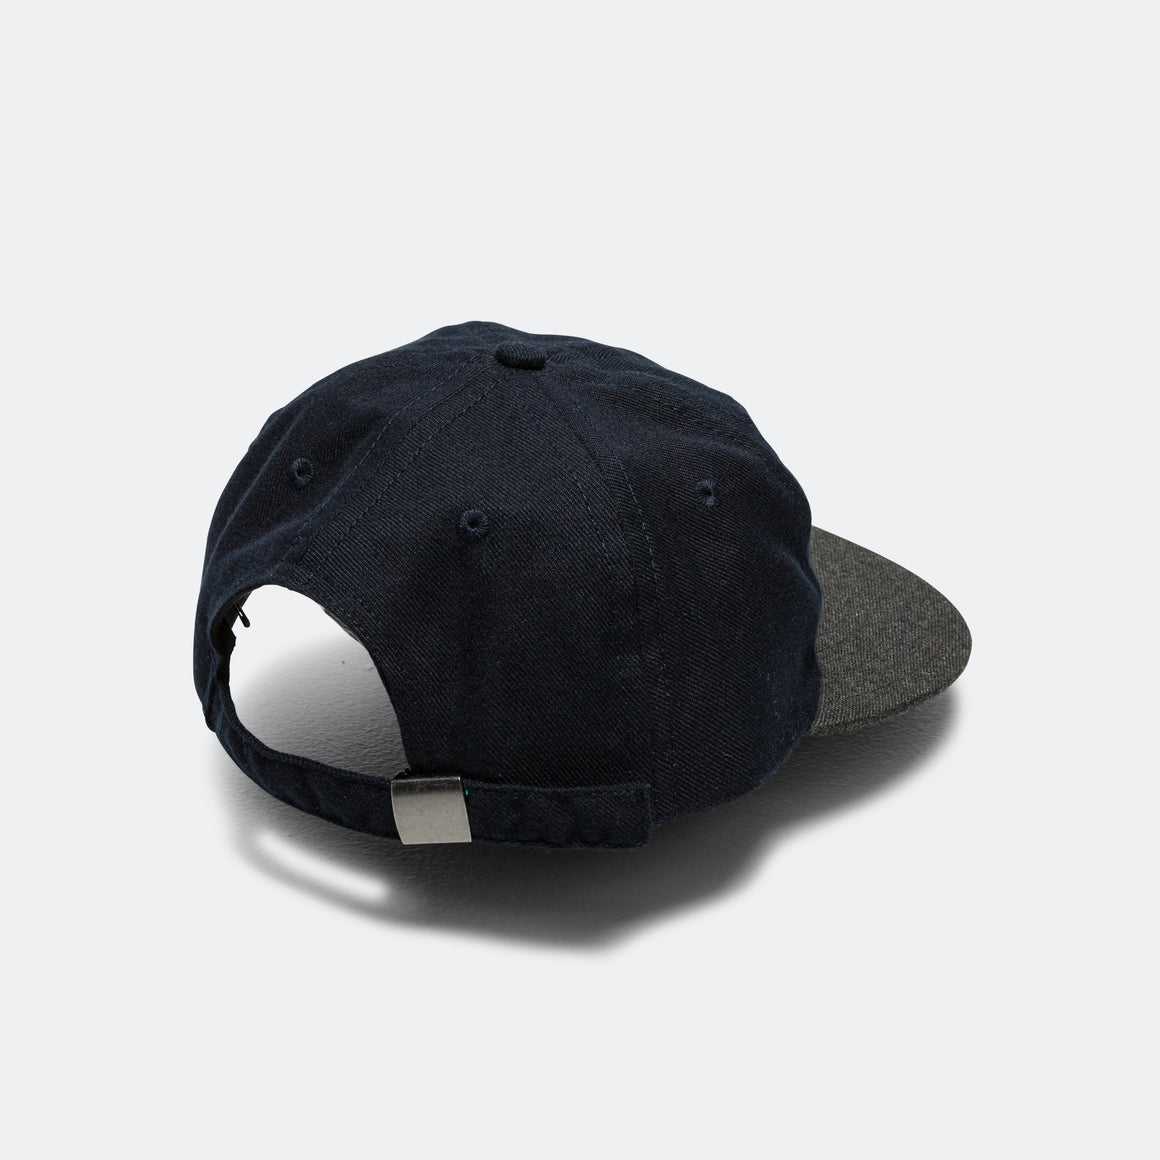 Lite Year - 6 Panel Cap - Navy/Charcoal - UP THERE